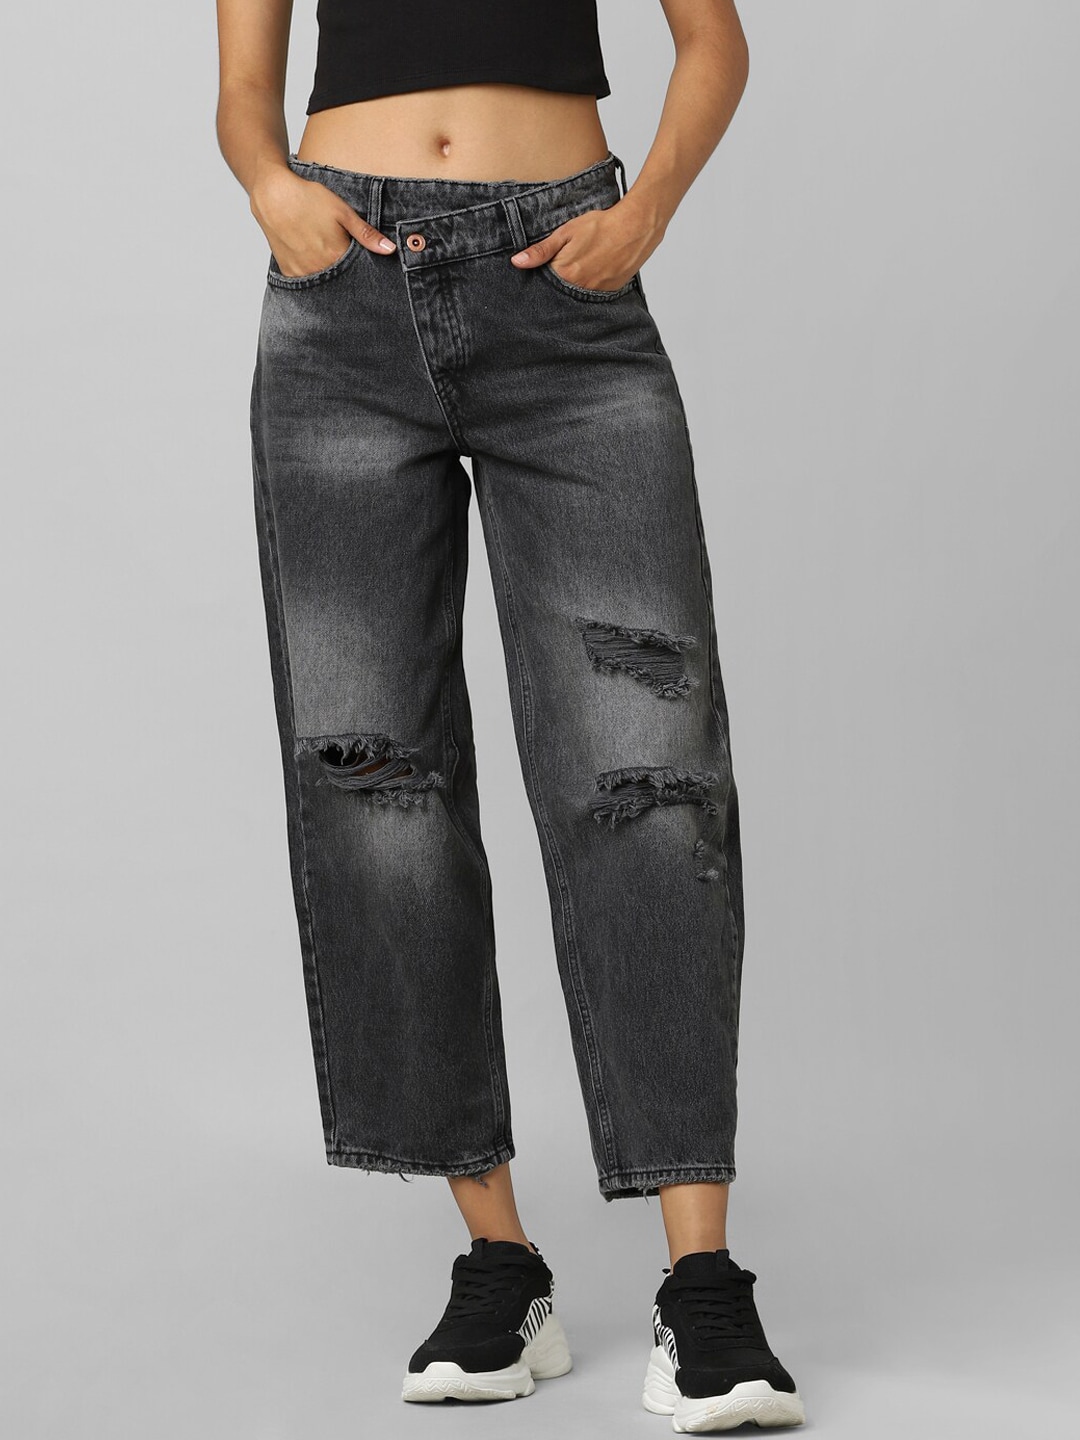 distressed jeans - Buy distressed jeans online India